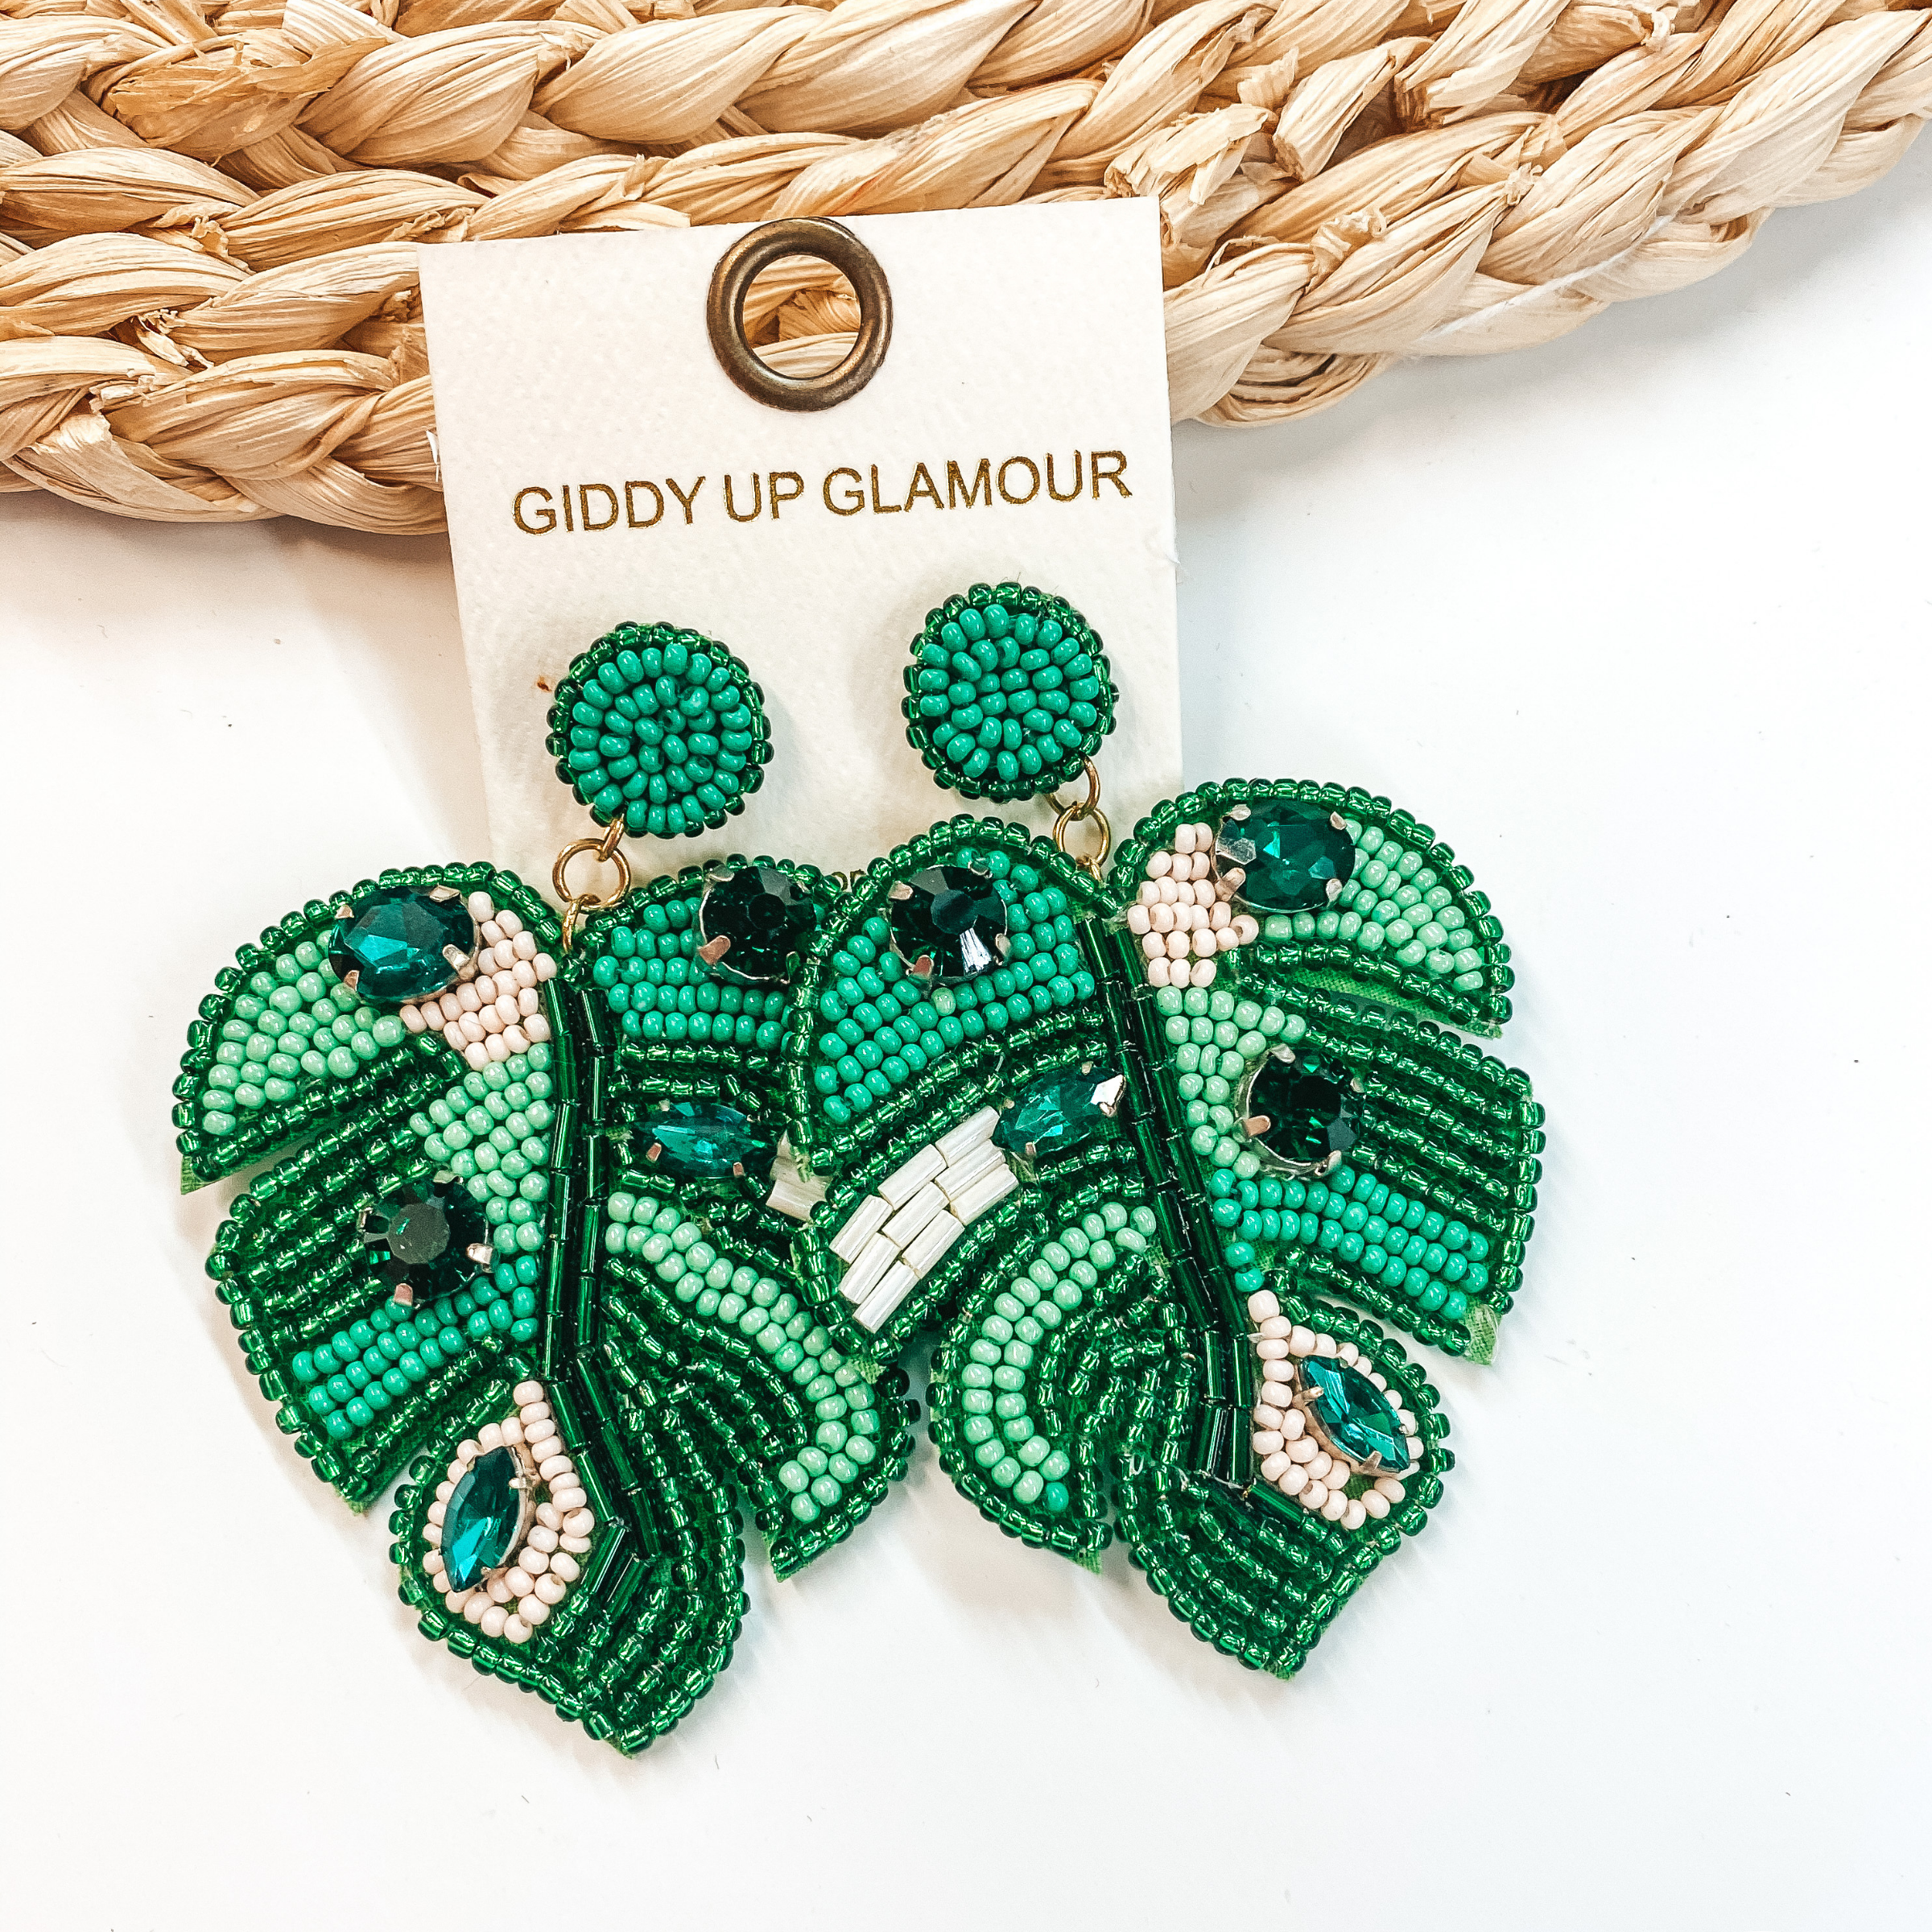 Palm Leaf Beaded Earrings With Crystal Accents in Green, Blush, and White - Giddy Up Glamour Boutique